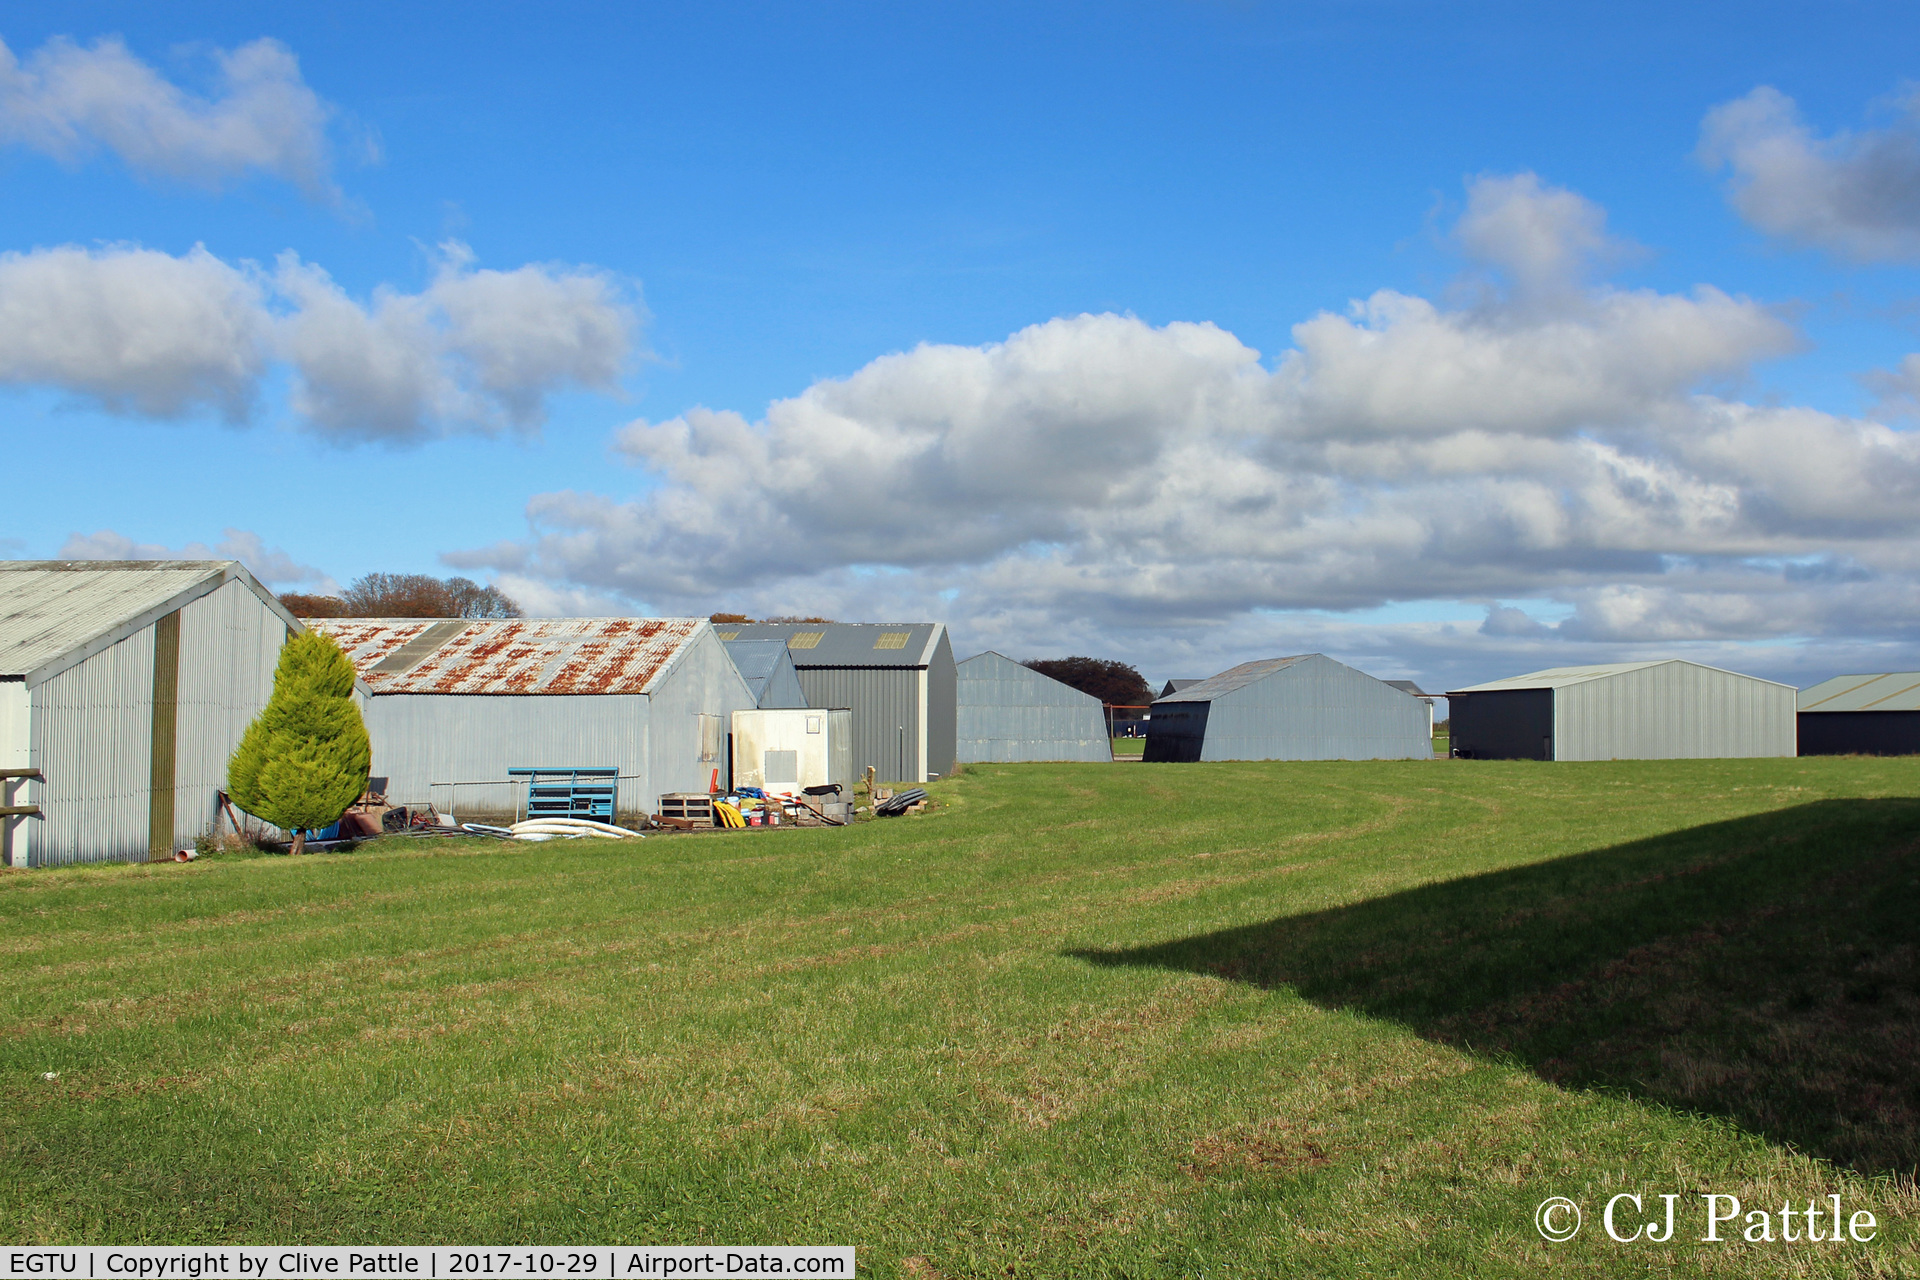 Dunkeswell Aerodrome Airport, Honiton, England United Kingdom (EGTU) - A section of the many hangars scattered about at Dunkeswell.